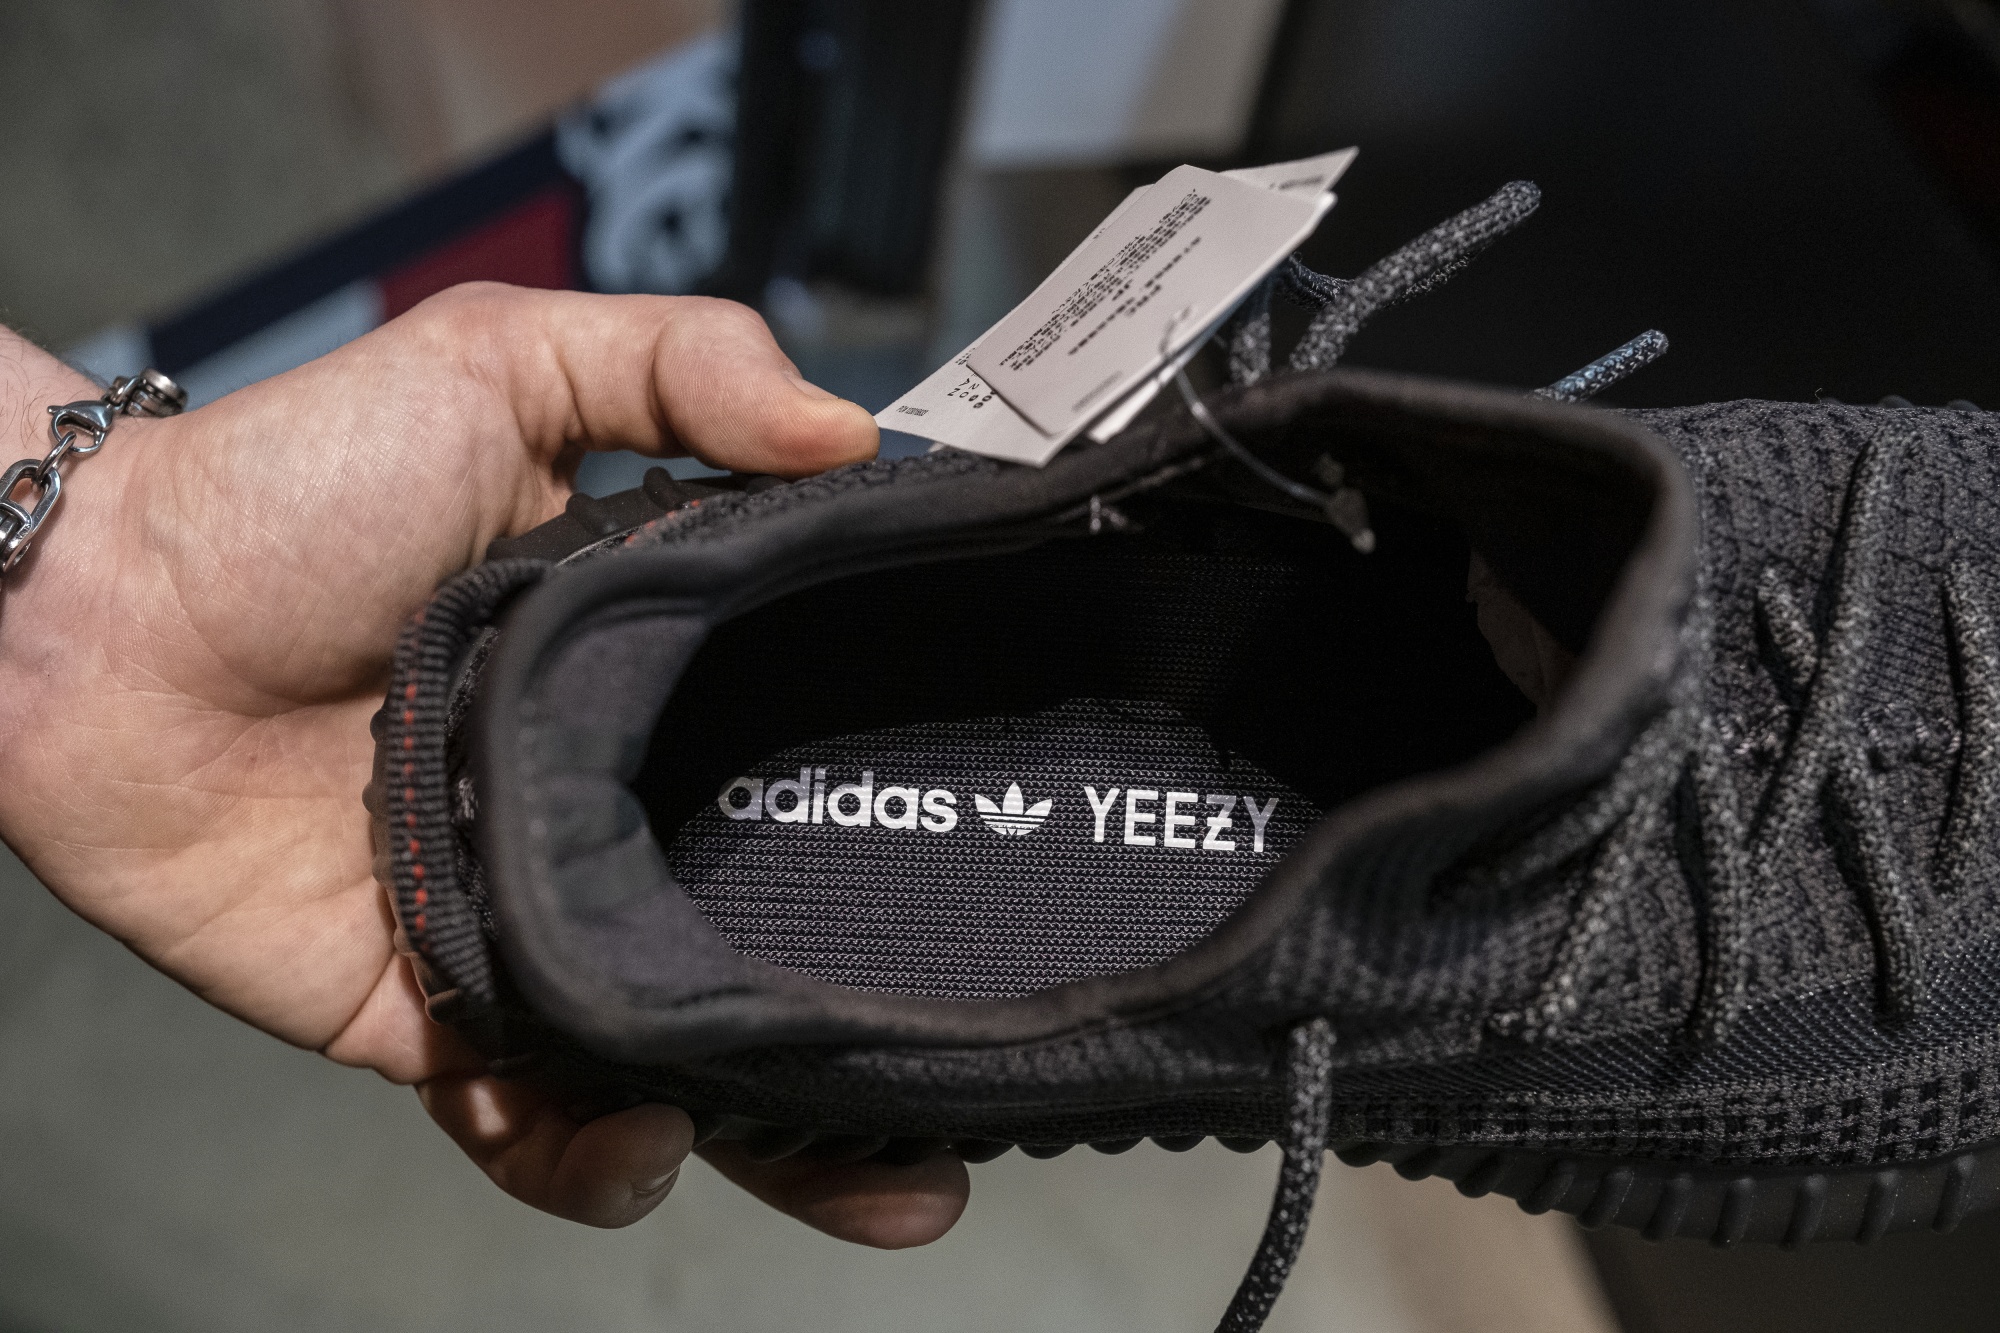 Adidas Kanye West's Yeezy shoes 'collectors' items' - BBC News-megaelearning.vn